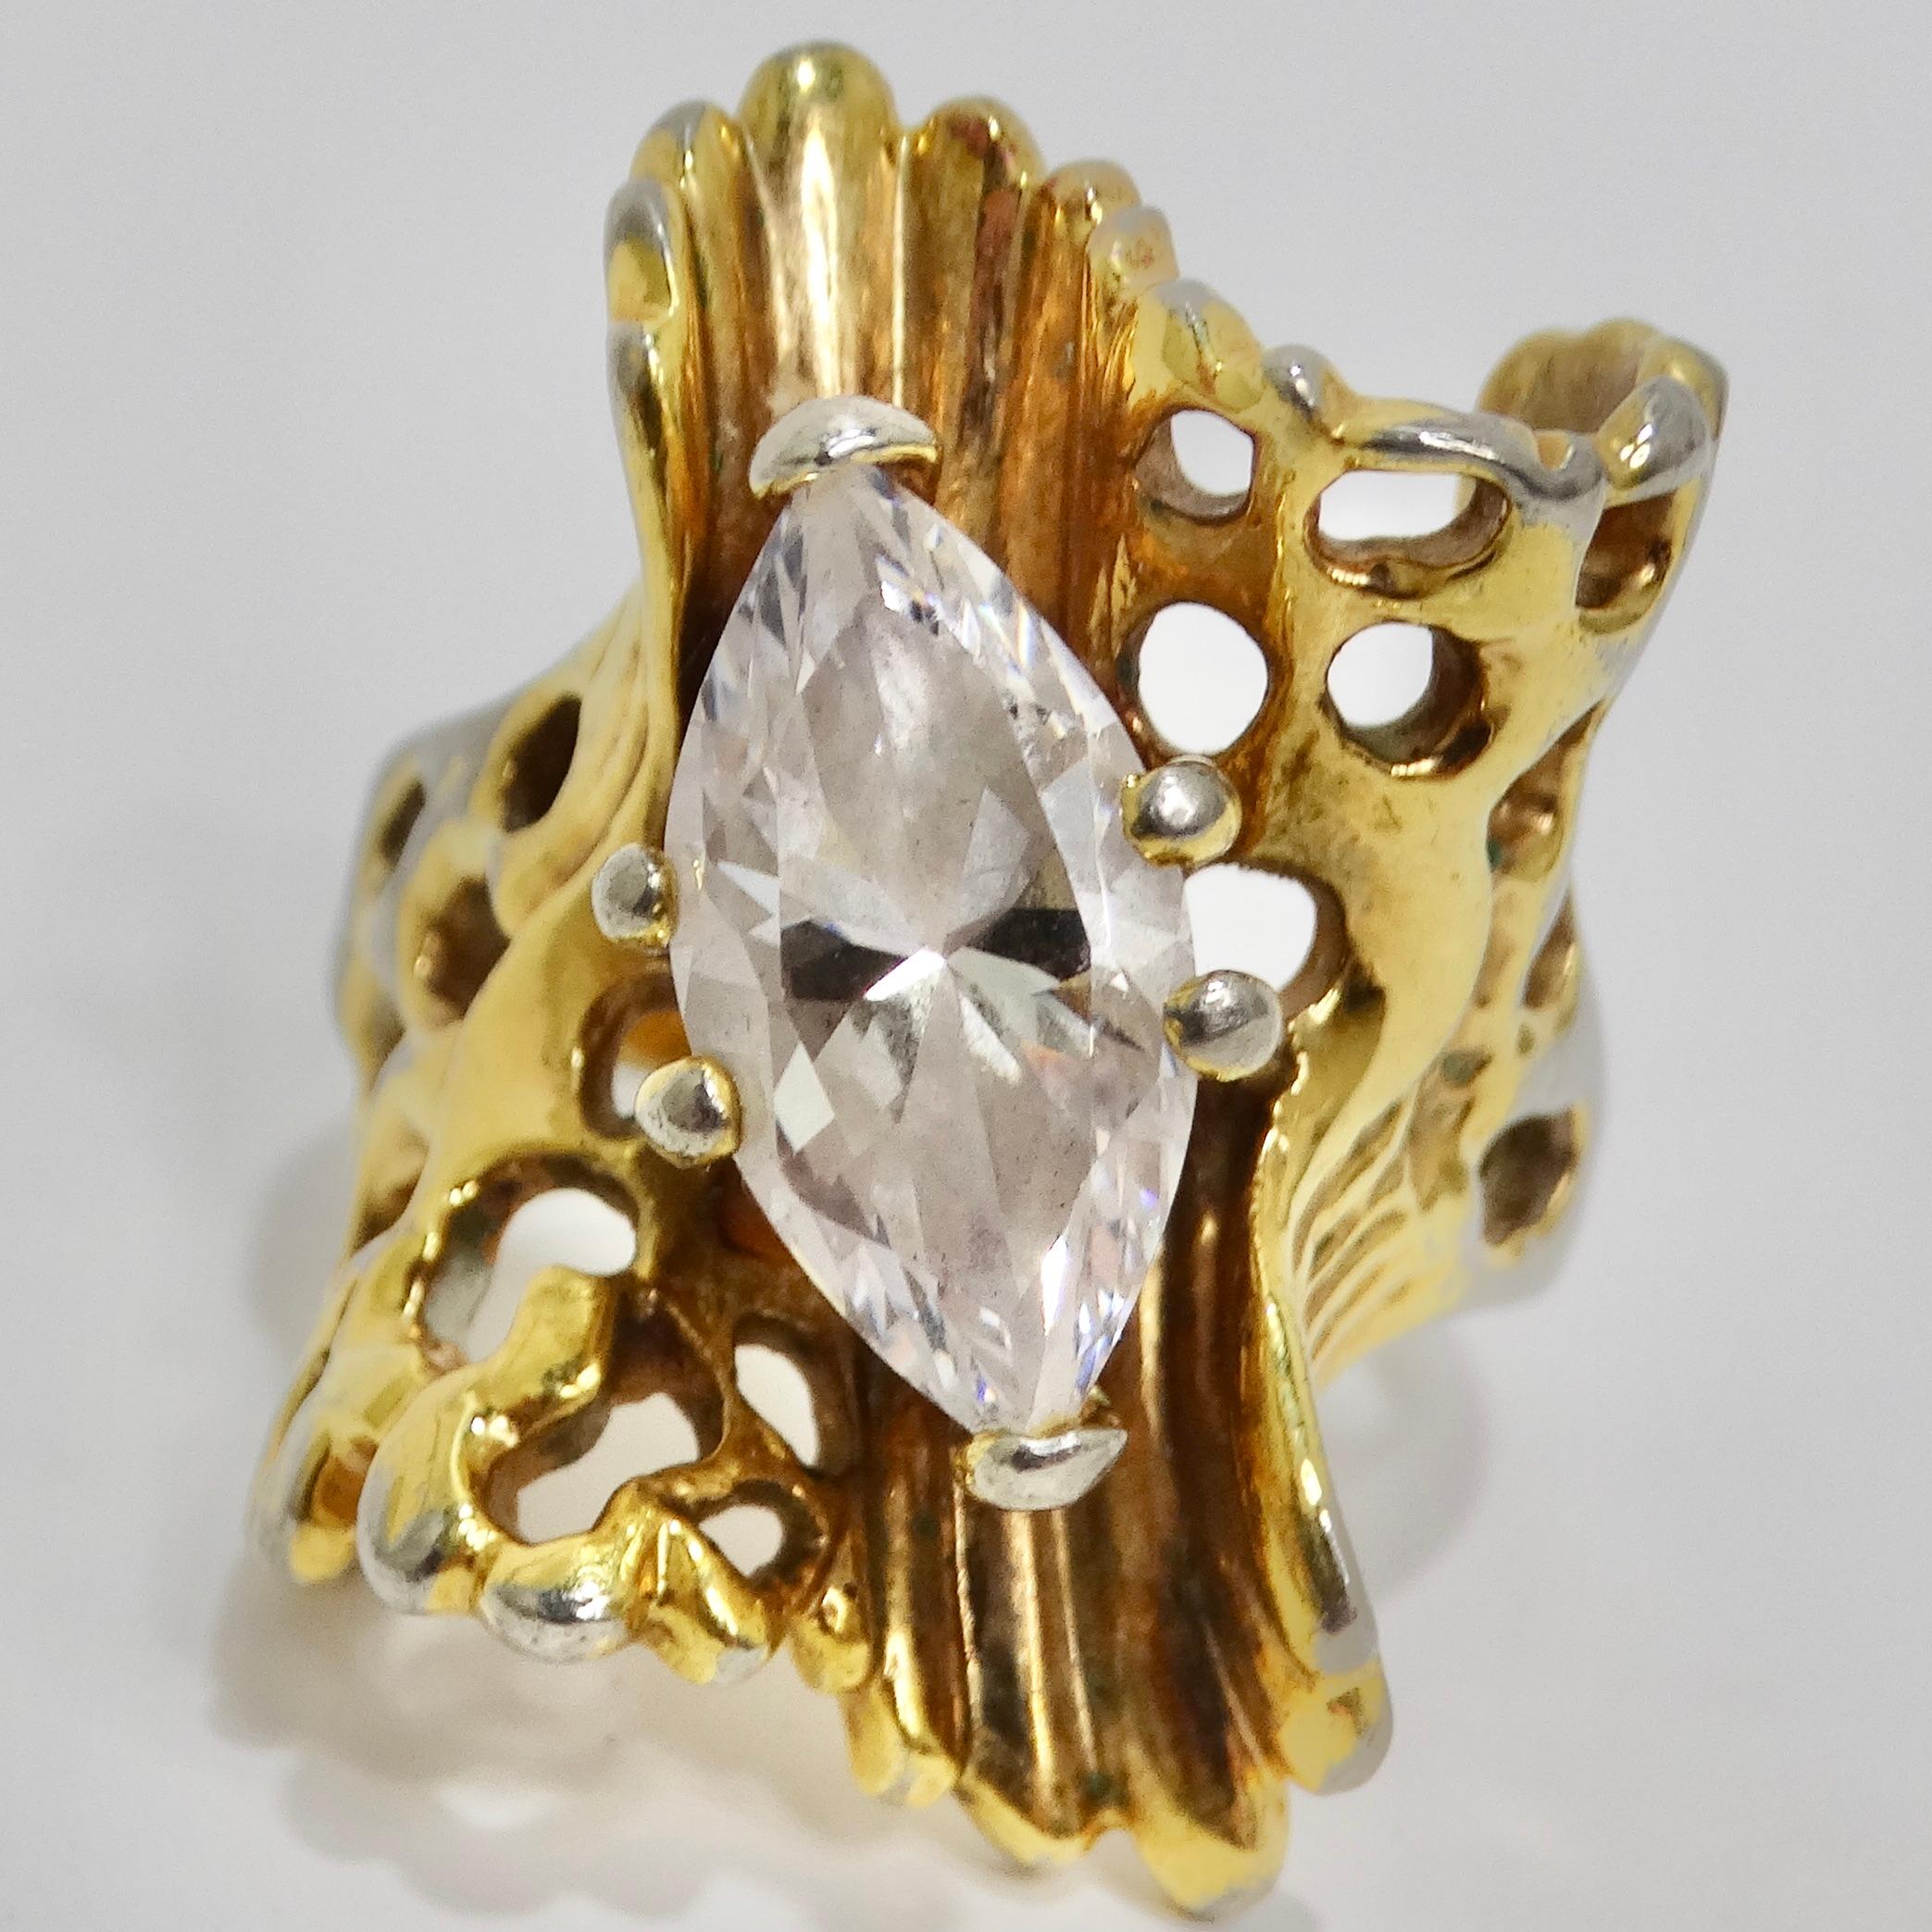 Step into the chic world of the 1970s with our captivating Cubic Zirconia Gold Plated Ring. This eye-catching gold plated silver tone ring boasts a distinctive gold tone motif encircling the synthetic cubic zirconia stone at its center, adding a